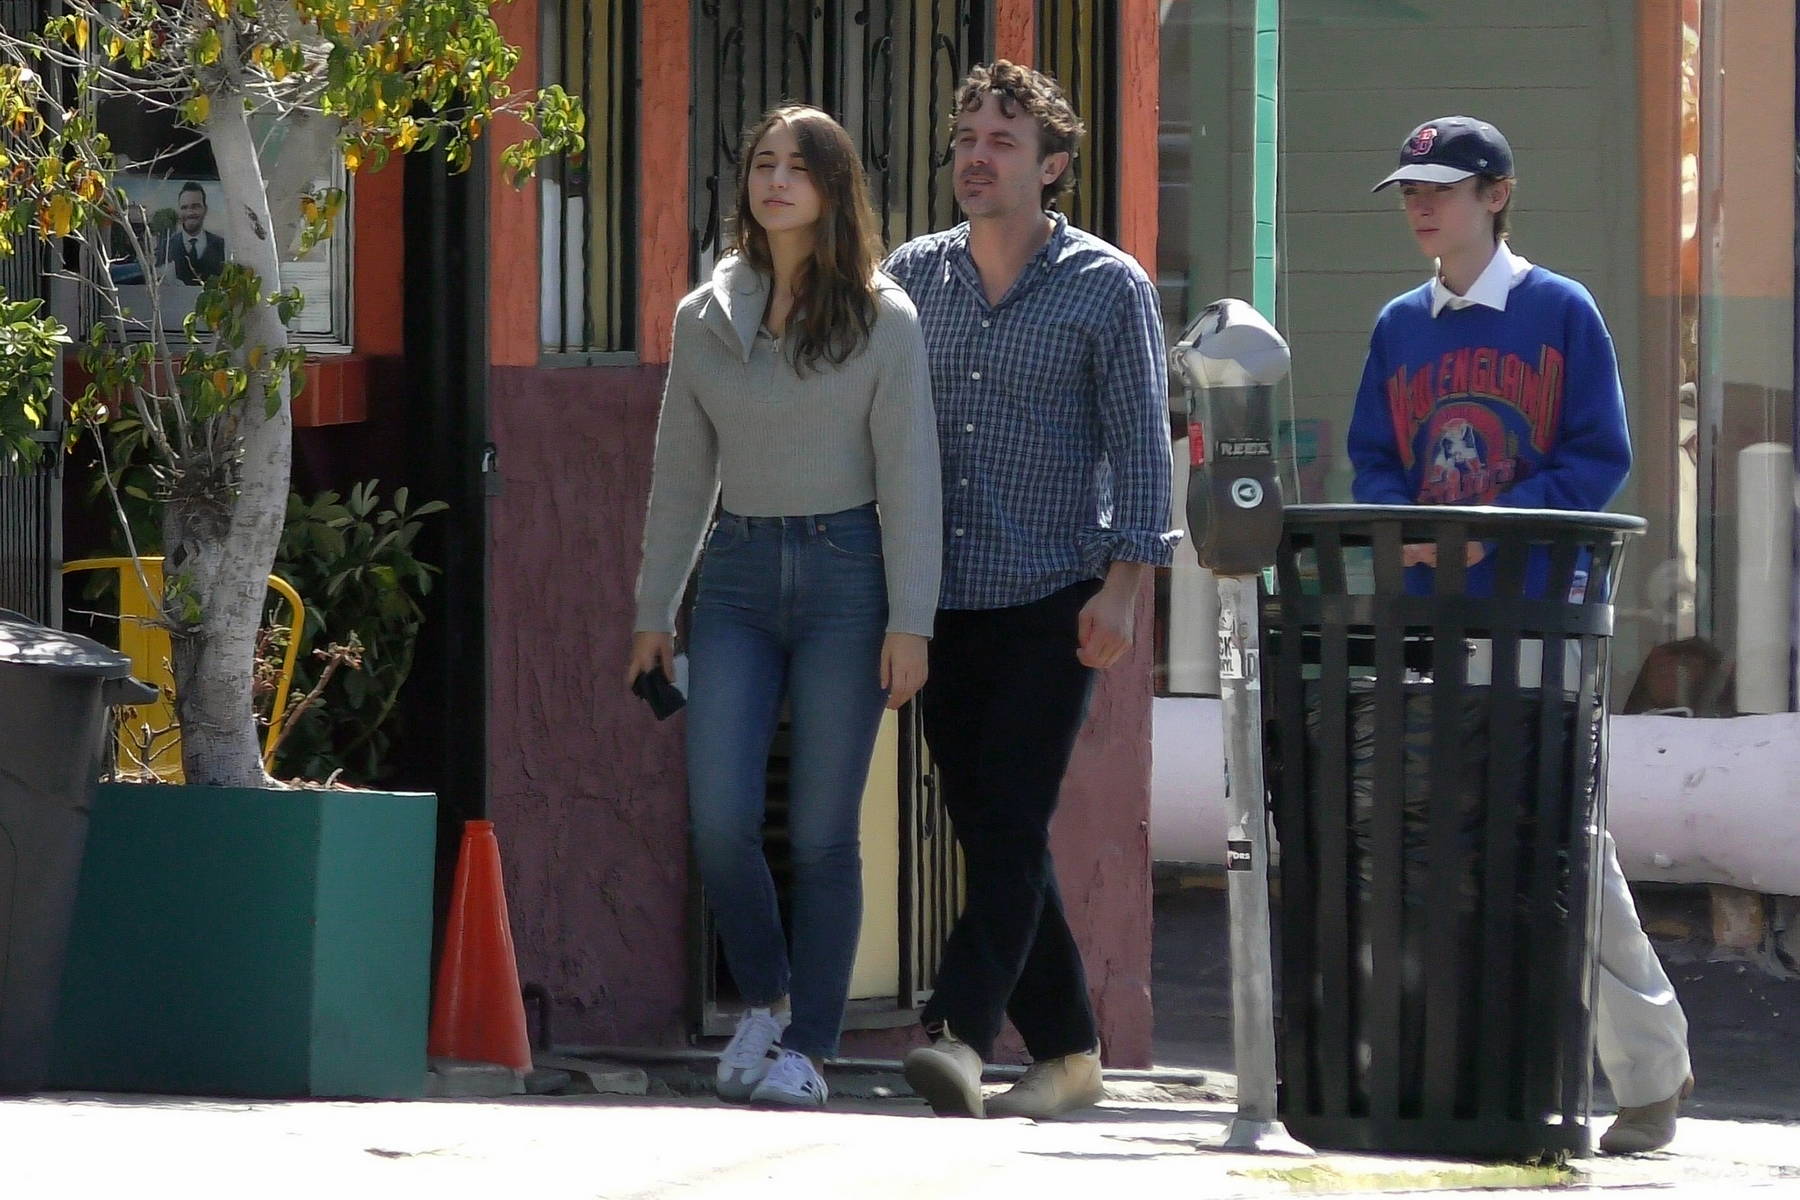 Casey Affleck and Caylee Cowan Out In Malibu